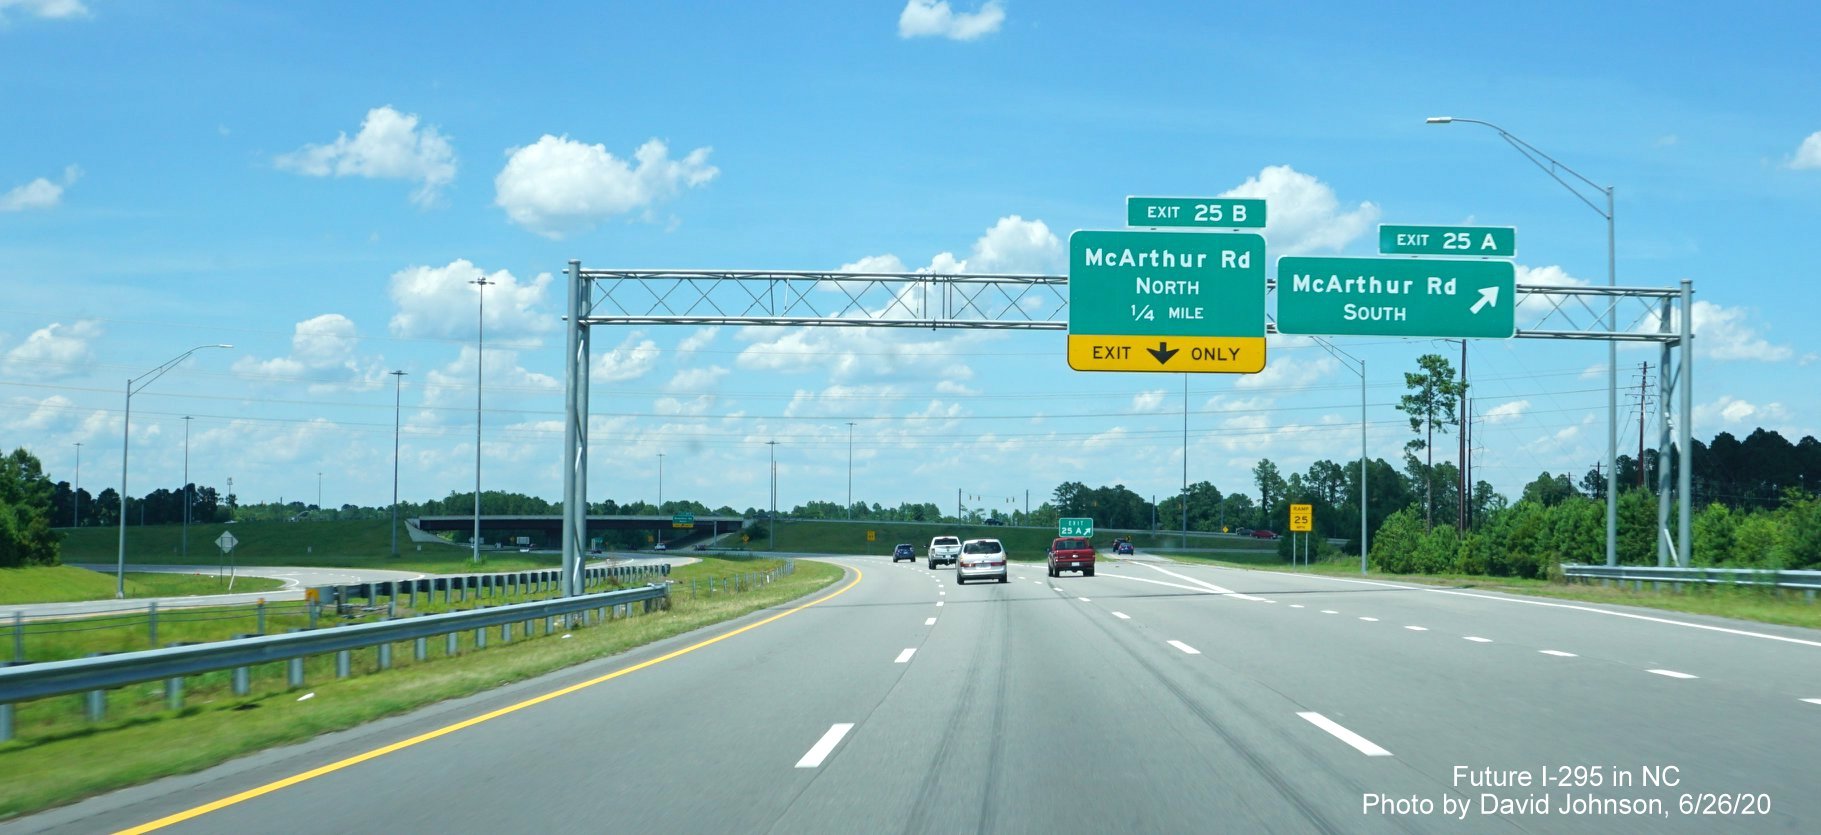 Image of the overhead signs for the McArthur Road interchange on I-295 North in Fayetteville, by David Johnson June 2020